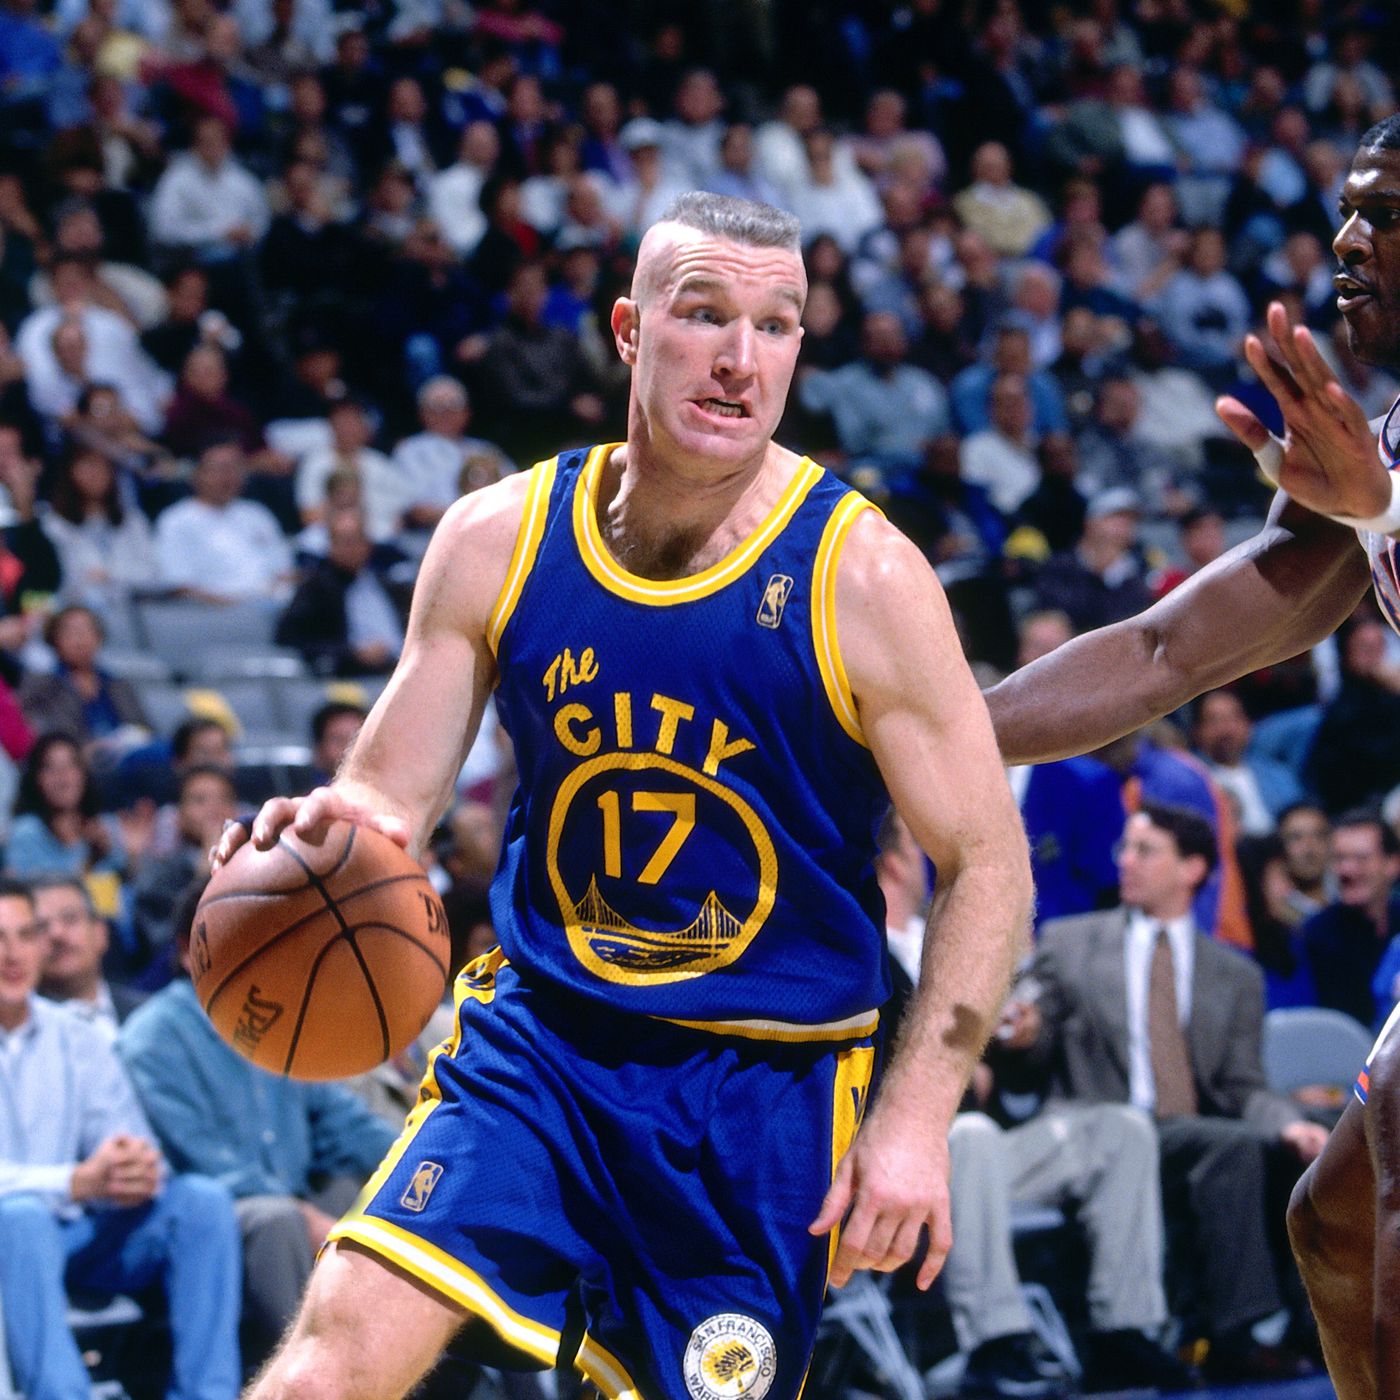 Chris Mullin, Inducted into the NYC Hall of Fame in 2002